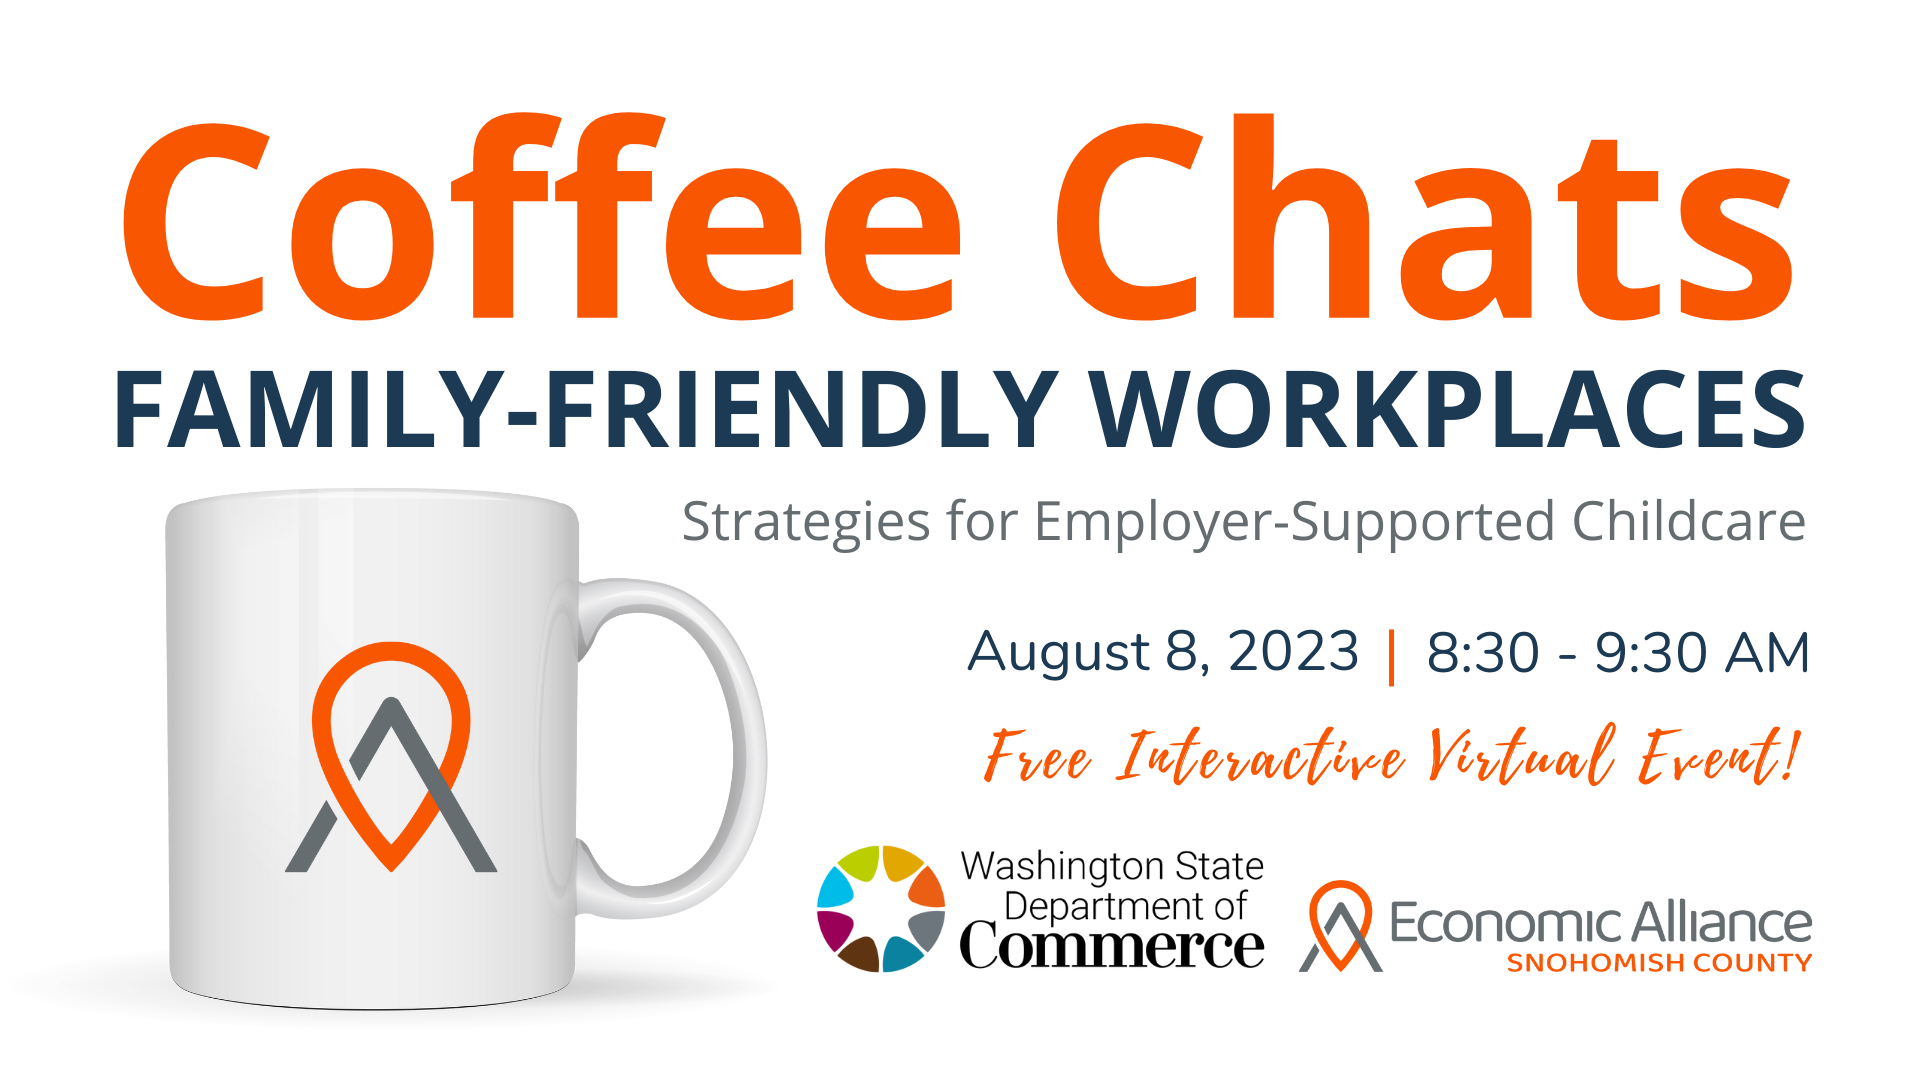 Event Promo Photo For Coffee Chats - Family-Friendly Workplaces: Strategies for Employer-Supported Childcare